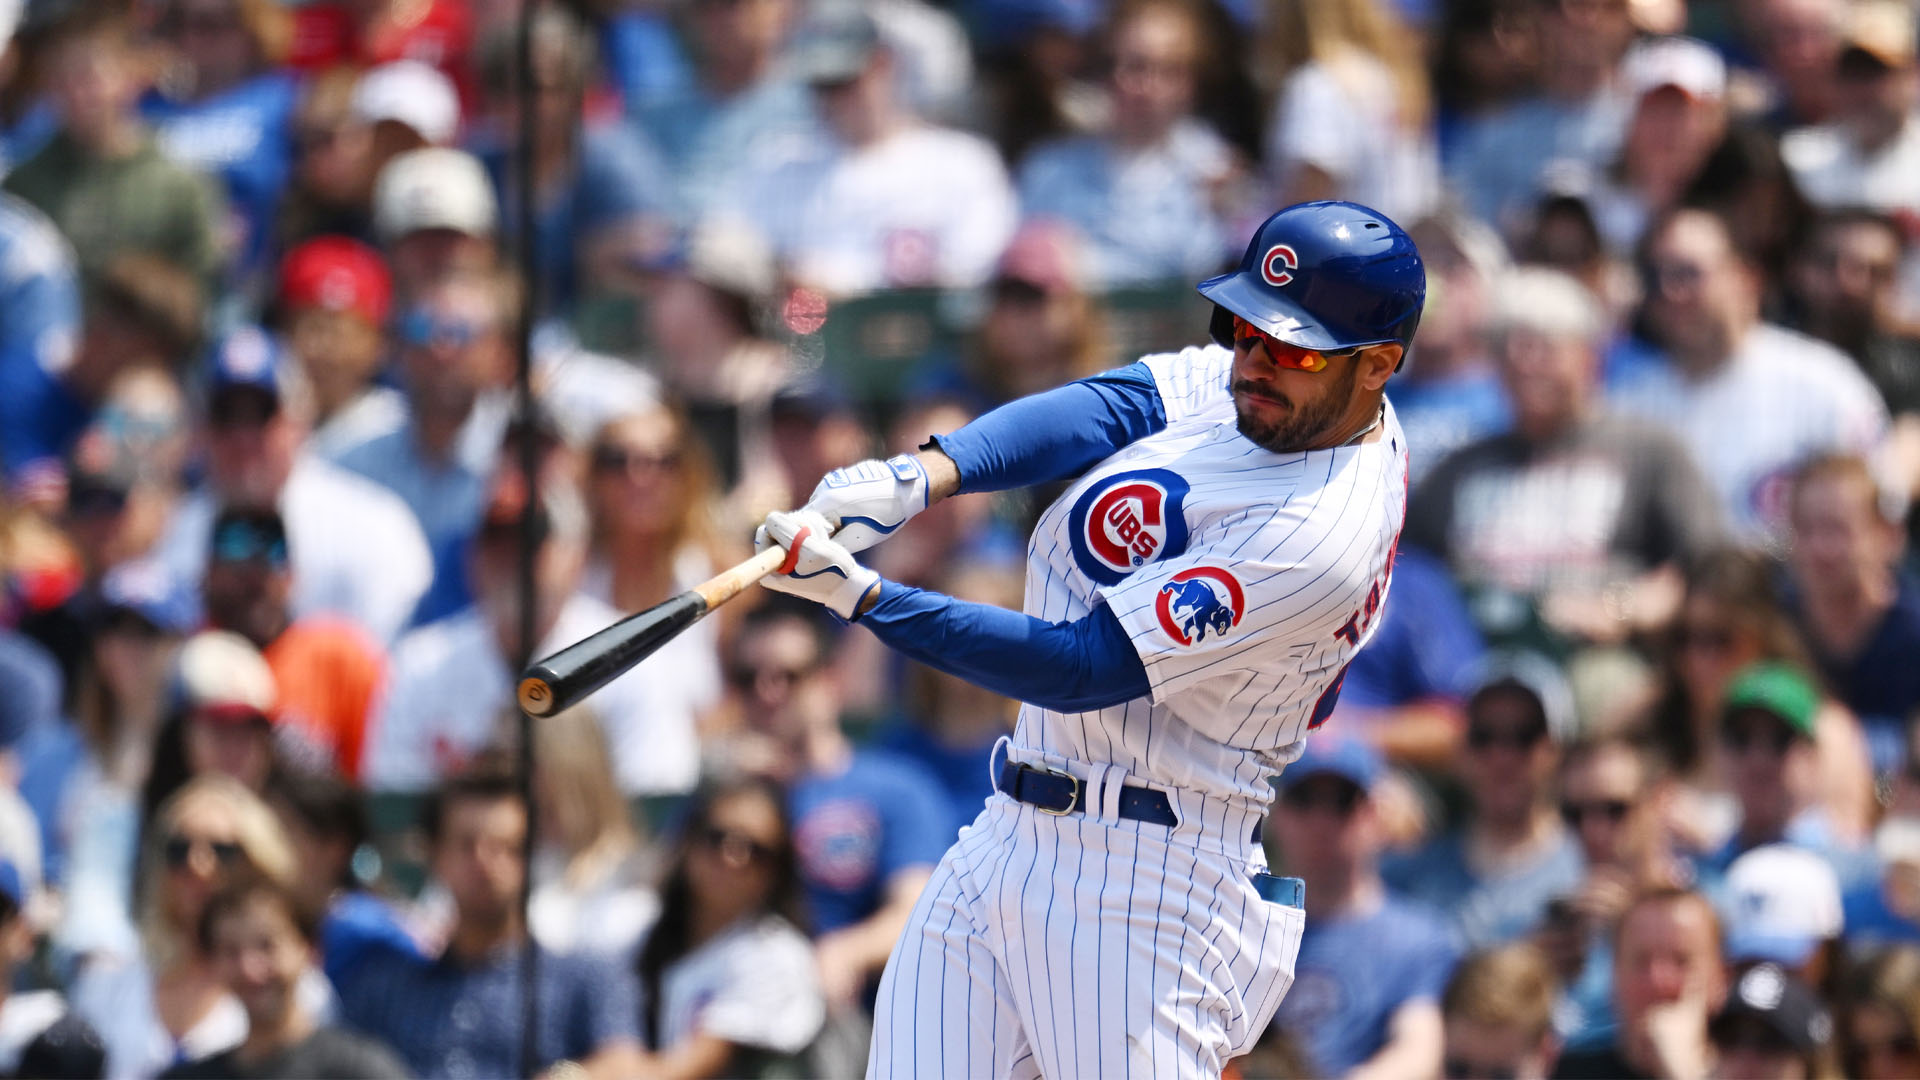 Cubs' Mike Tauchman hits 1st home run with Cubs – NBC Sports Chicago